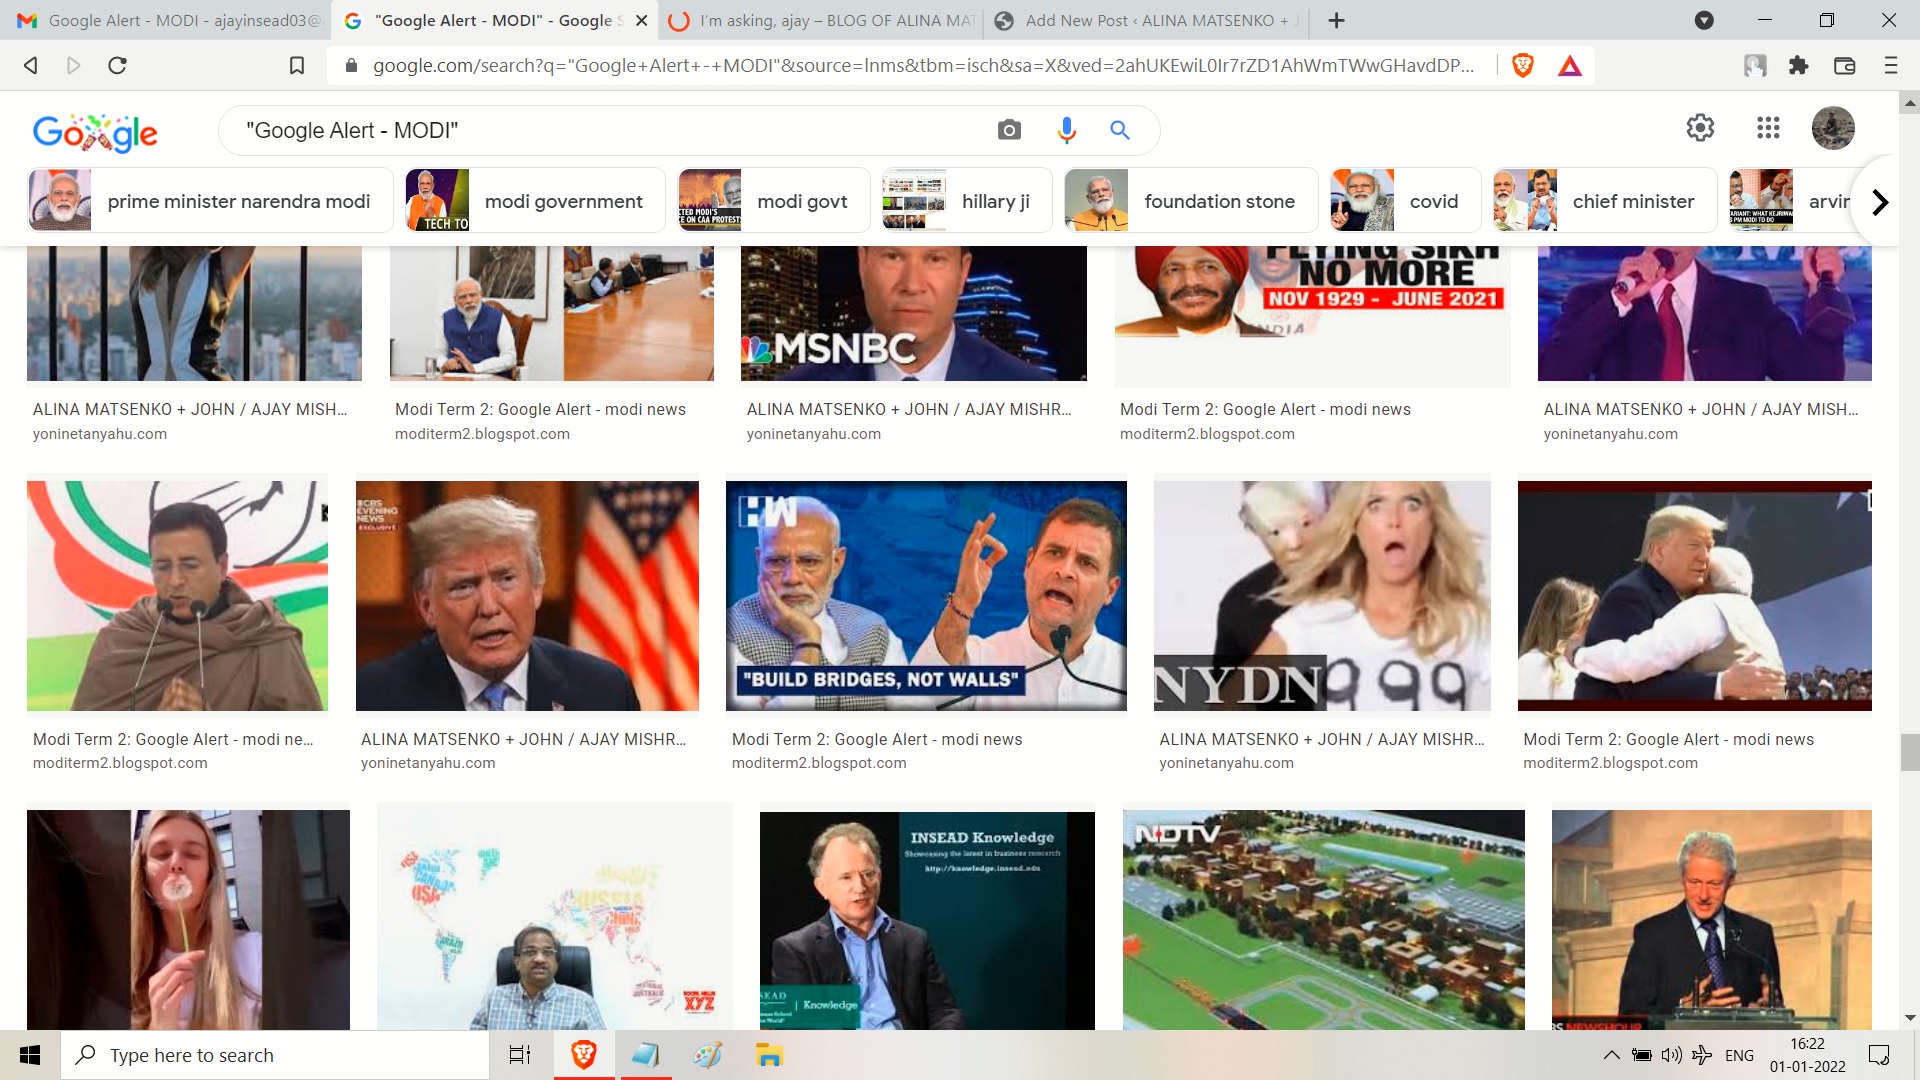 GOOGLE ALERT MODI HAPPY NEAY TYERA RAHUL GANDHI SIR AND MODI JI AND MRSSONIA GANDHI AD MSULIMS ALSO NOTJUST TO BRAHMIAND JEWS ONLY BUT END OWSIS AND KAHSN HATEED -- .-----